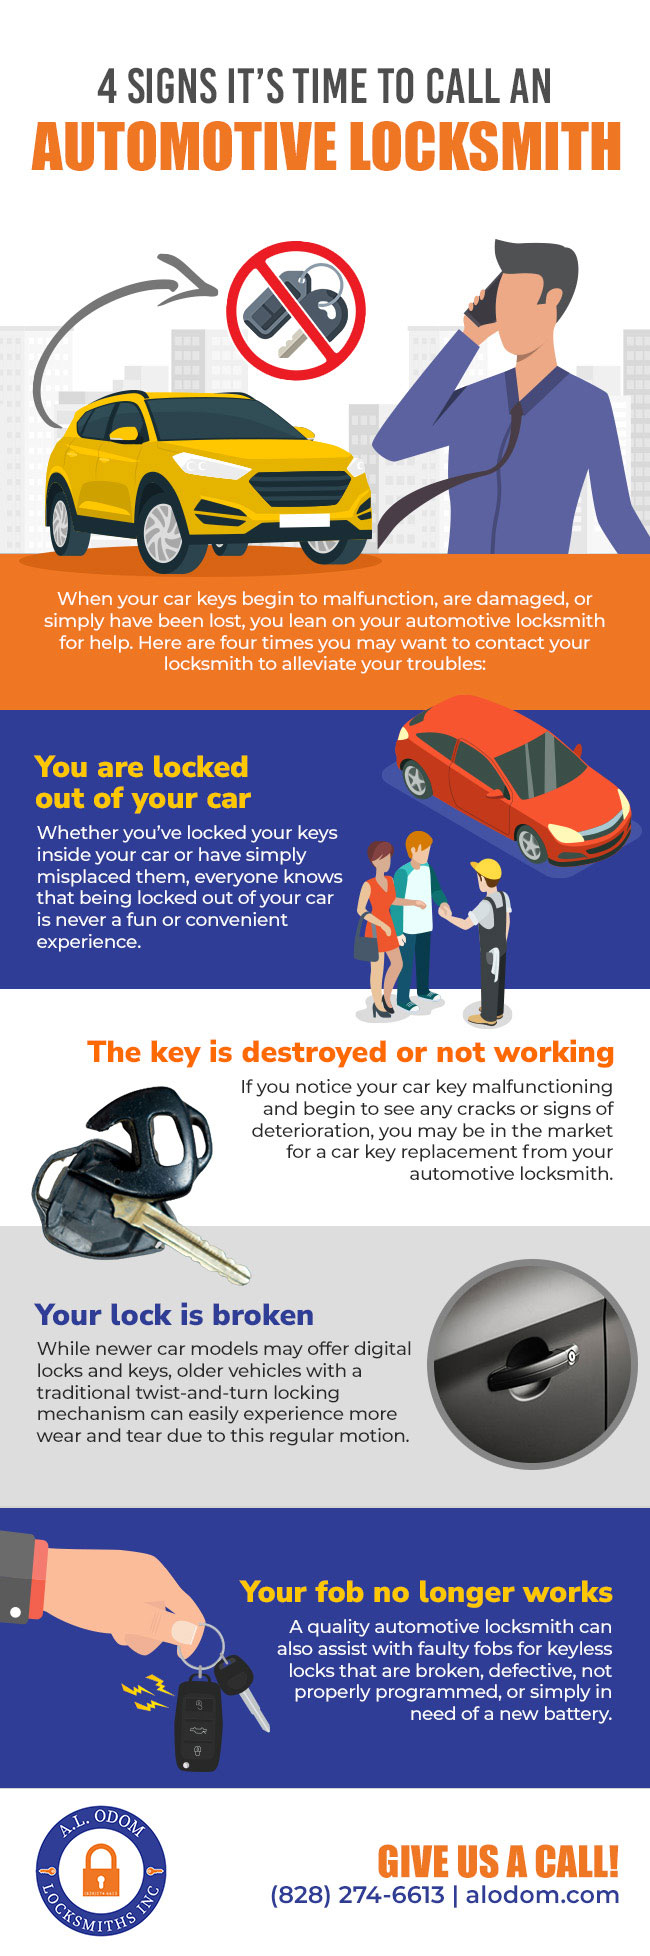 4 Signs It’s Time for to Call an Automotive Locksmith